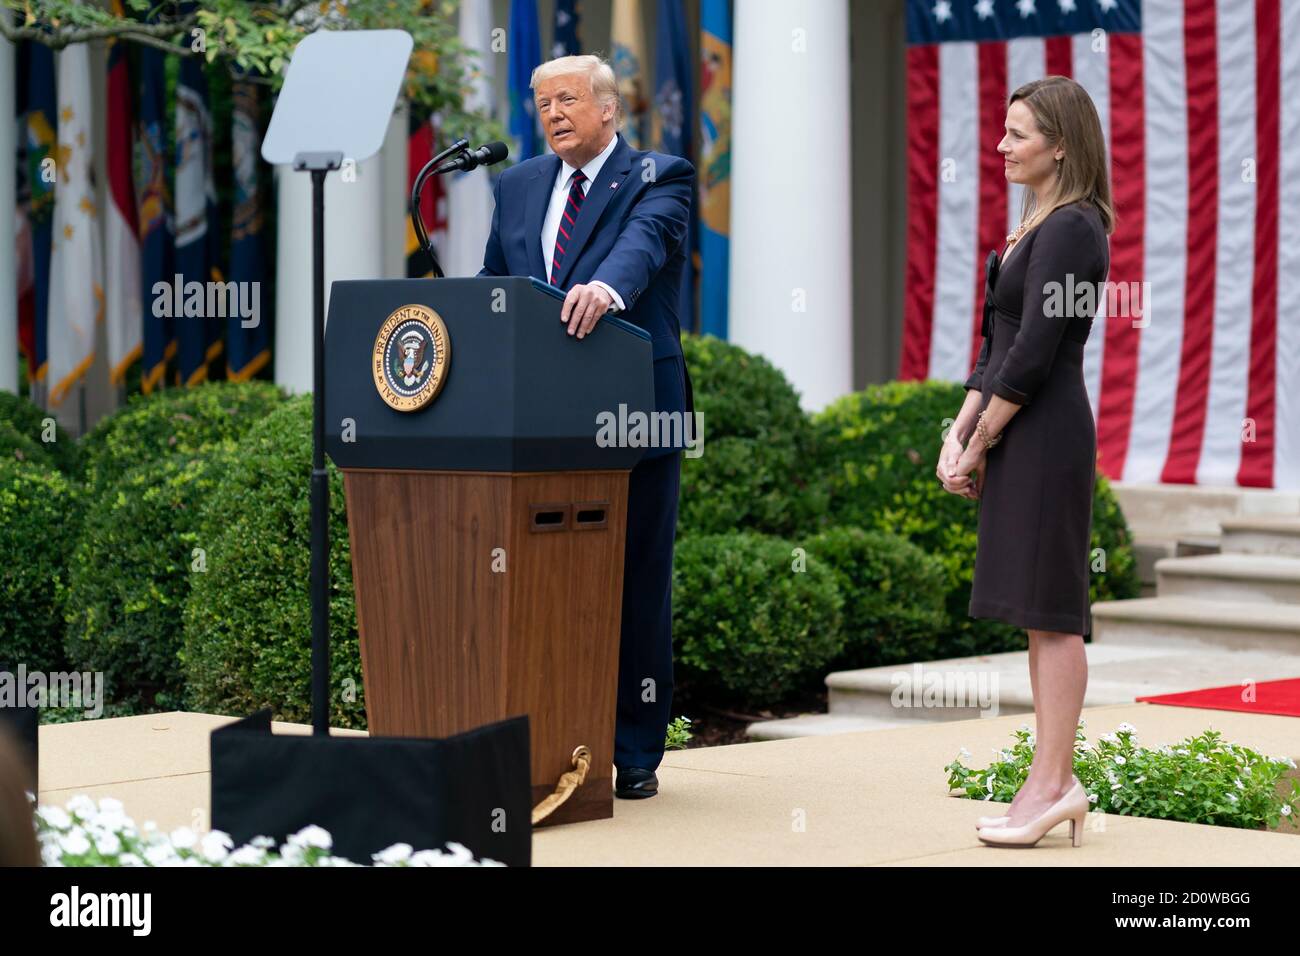 President Donald J. Trump announces Judge Amy Coney Barrett as his nominee for Associate Justice of the Supreme Court of the United States Saturday, September 26, 2020, in the Rose Garden of the White House. (USA) Stock Photo